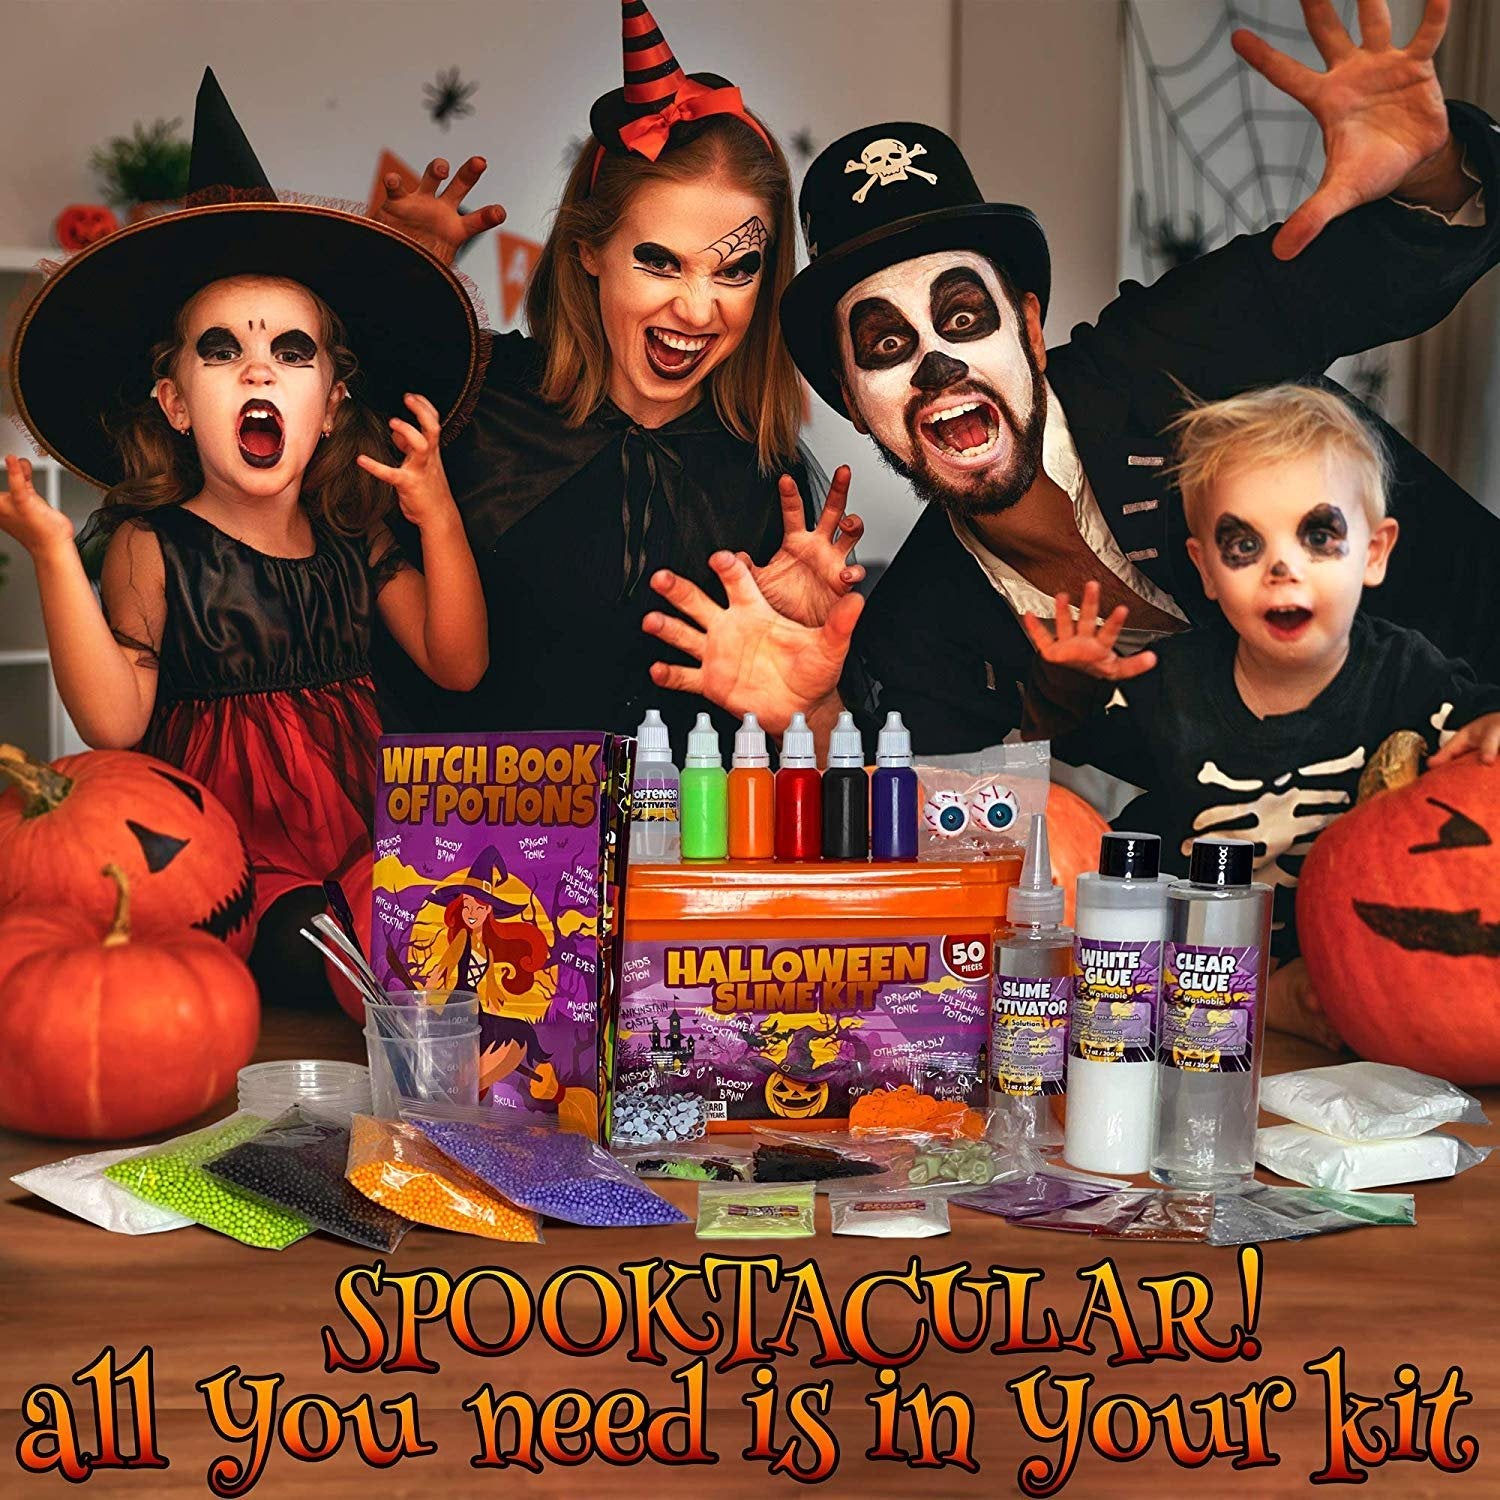 Laevo Spooky Slime Kit for Girls and Boys - 50 Pieces DIY Slime Making Set Supplies - Slime Glue, Activator, Glowing, Creepy, Scary, and Spooky Add Ins - Slime Making Kit Gift for Kids